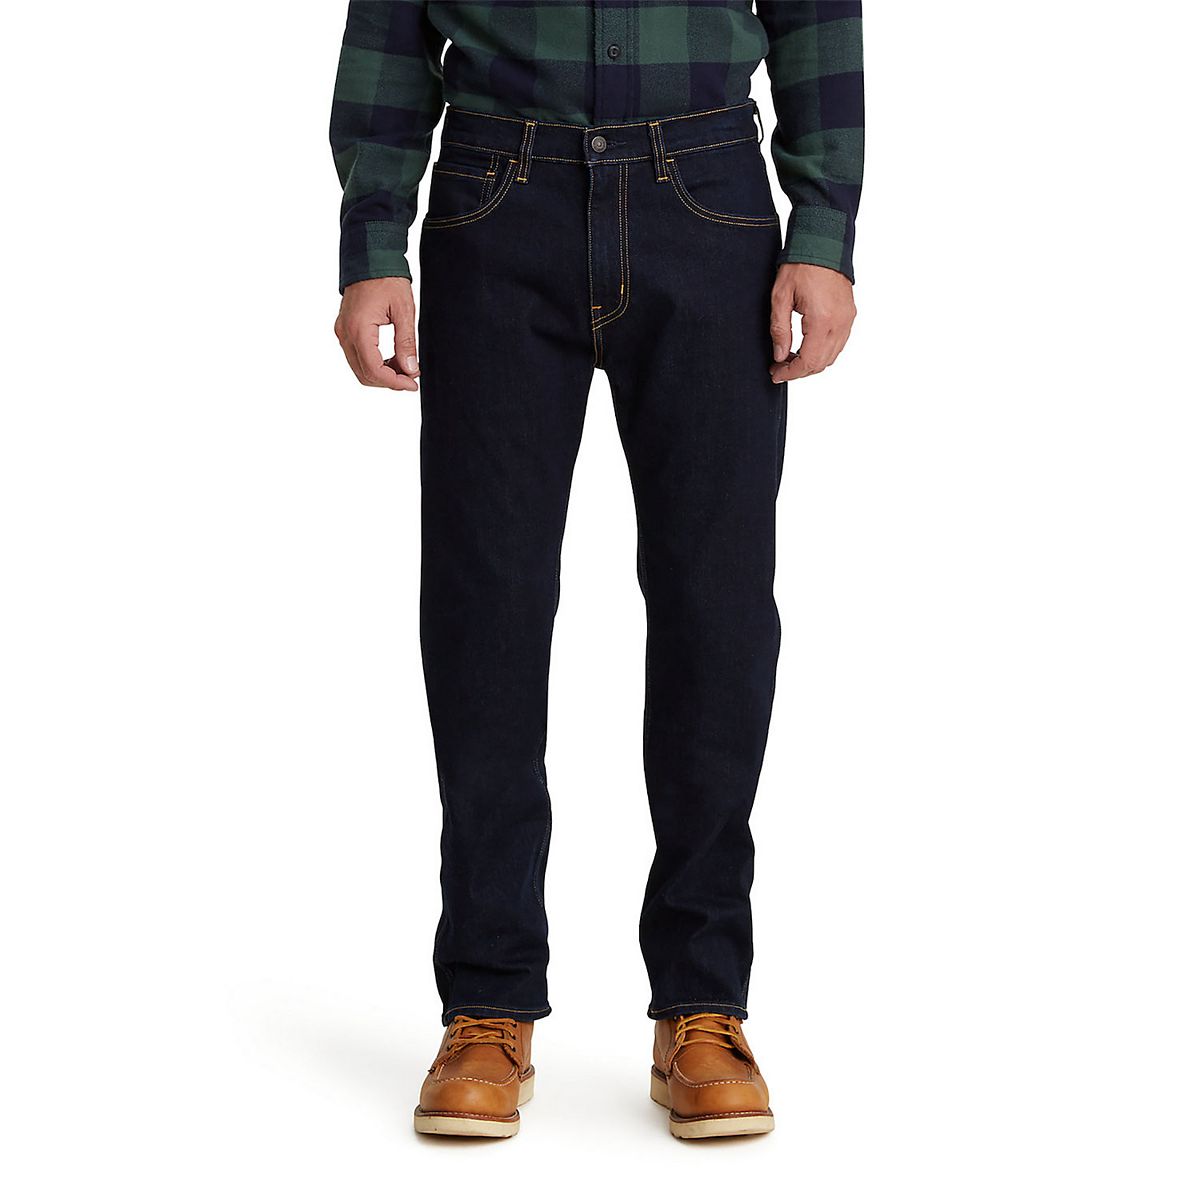 LEVIS 505 WORKWEAR - The Blue Ox 916